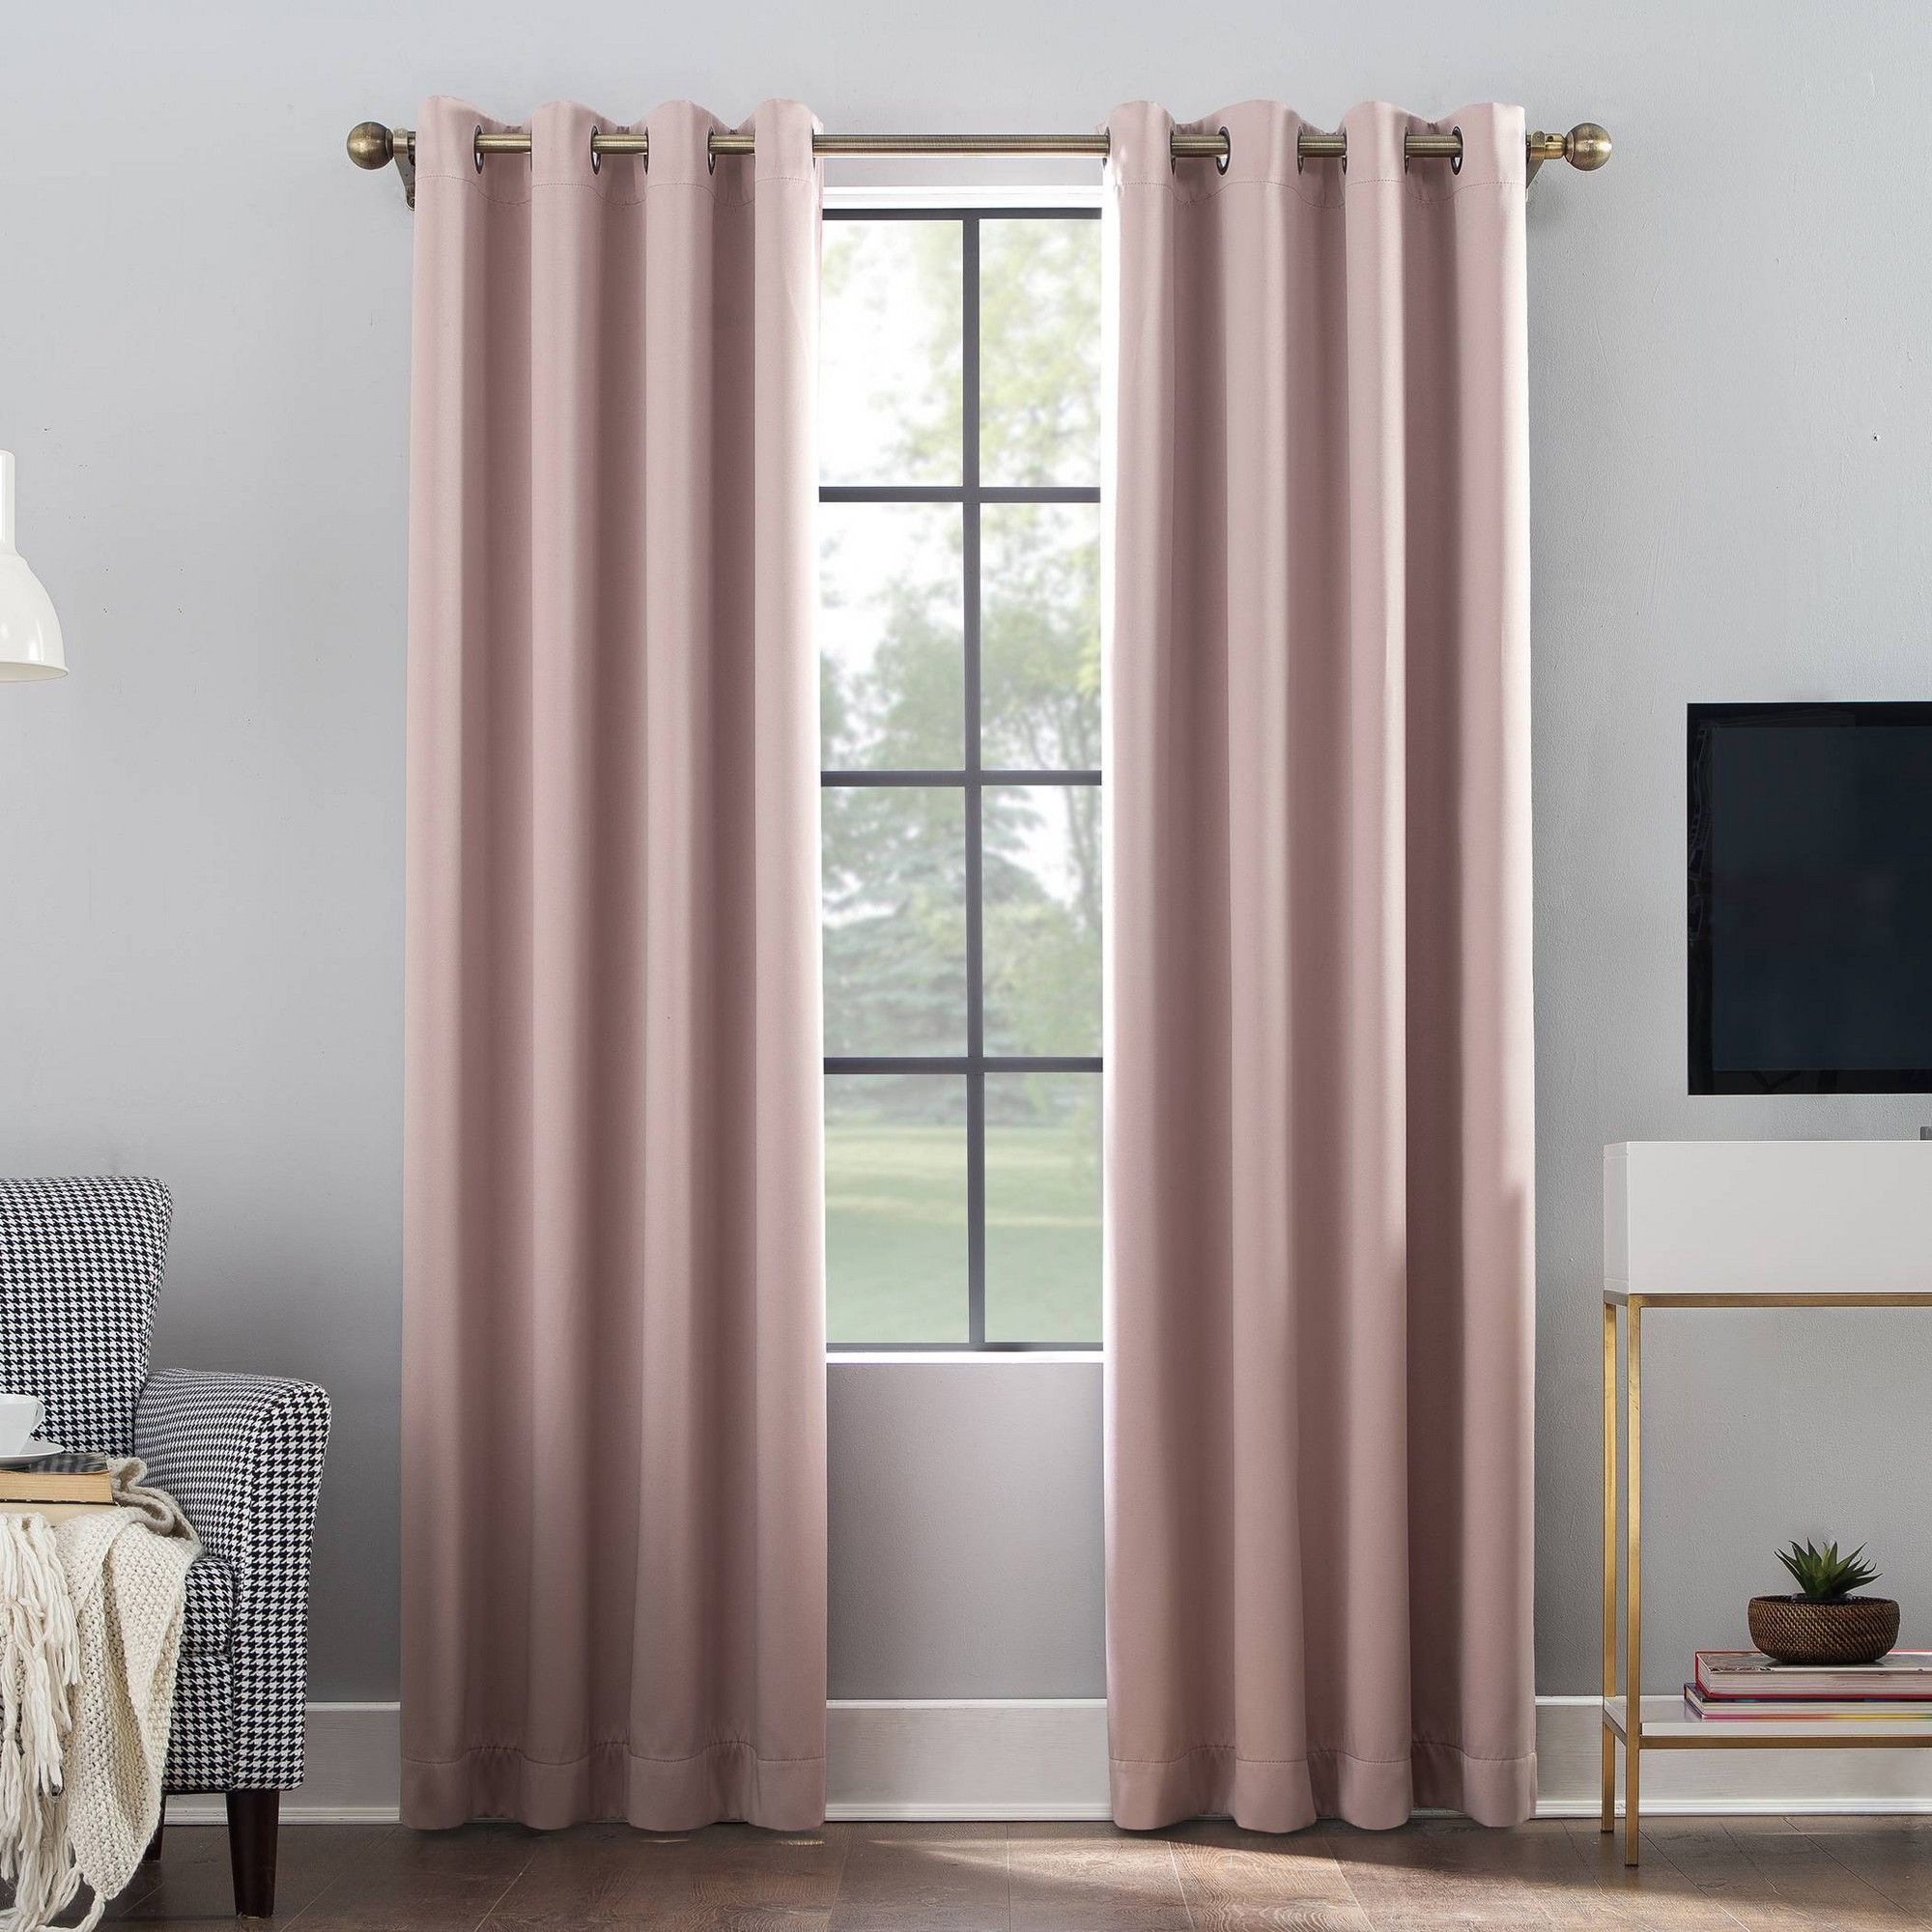 52"x95" Oslo Grommet Top Blackout Window Curtain Panel Blush Throughout Riley Kids Bedroom Blackout Grommet Curtain Panels (View 17 of 20)